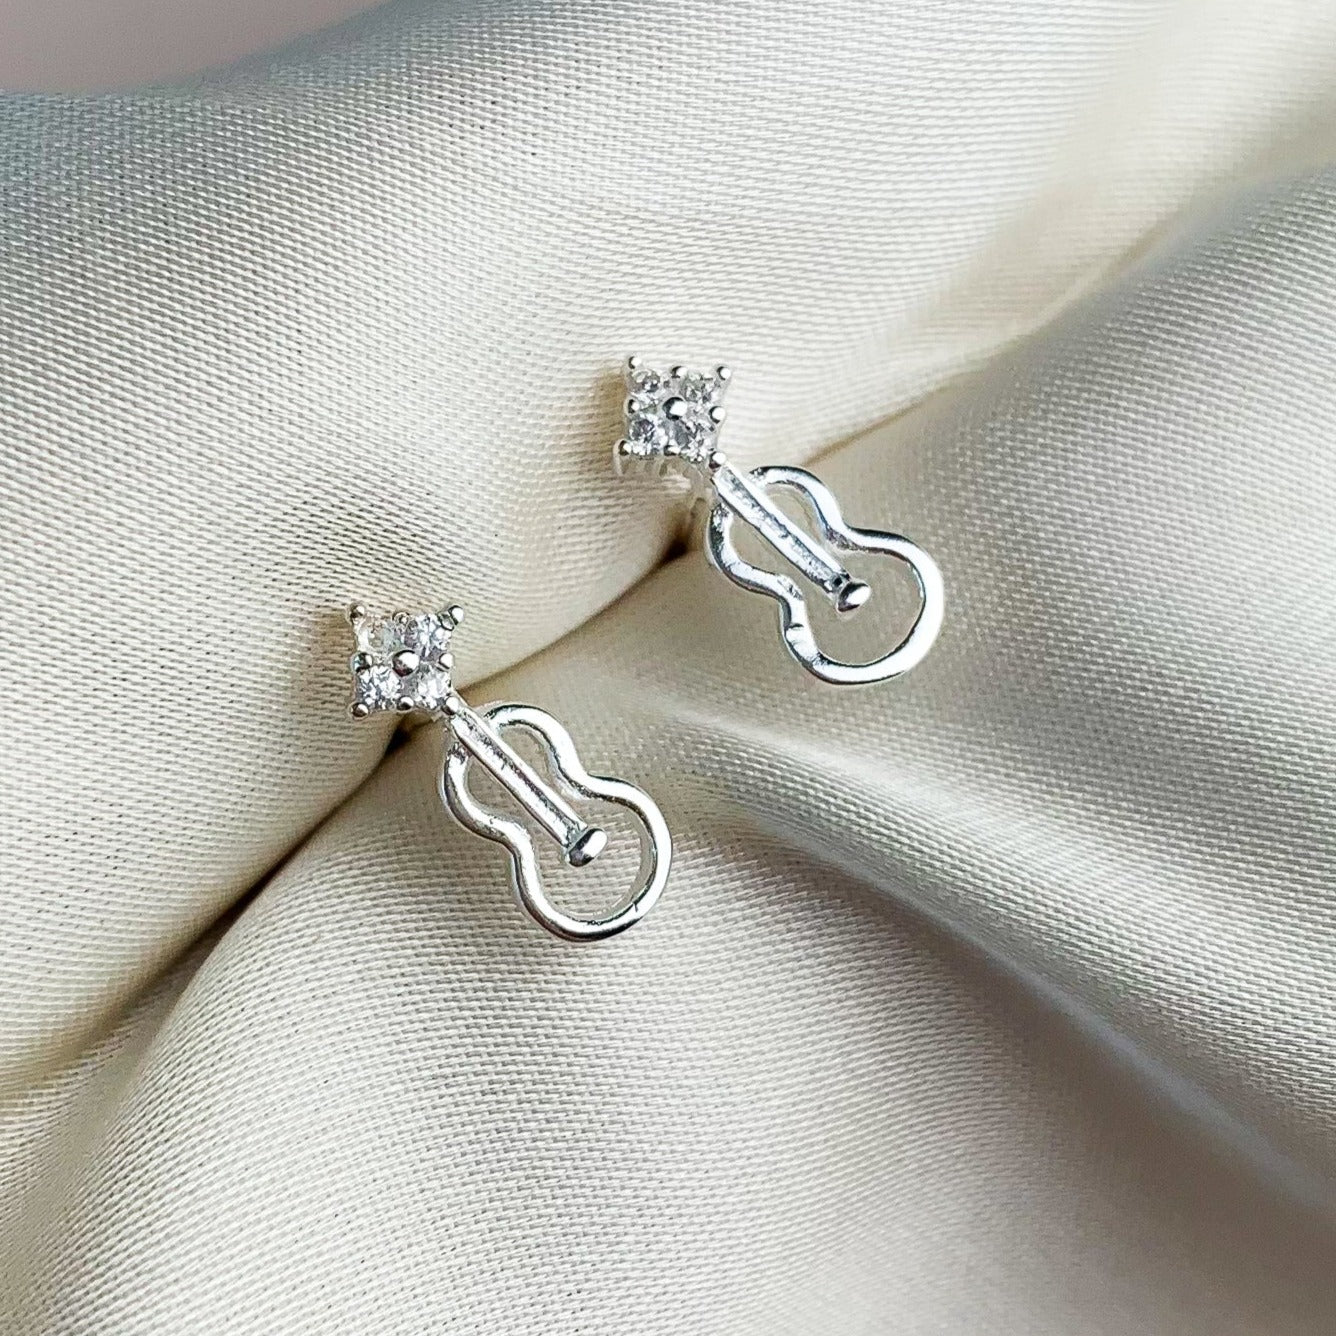 Tiny Guitar Stud Earrings with White Crystal